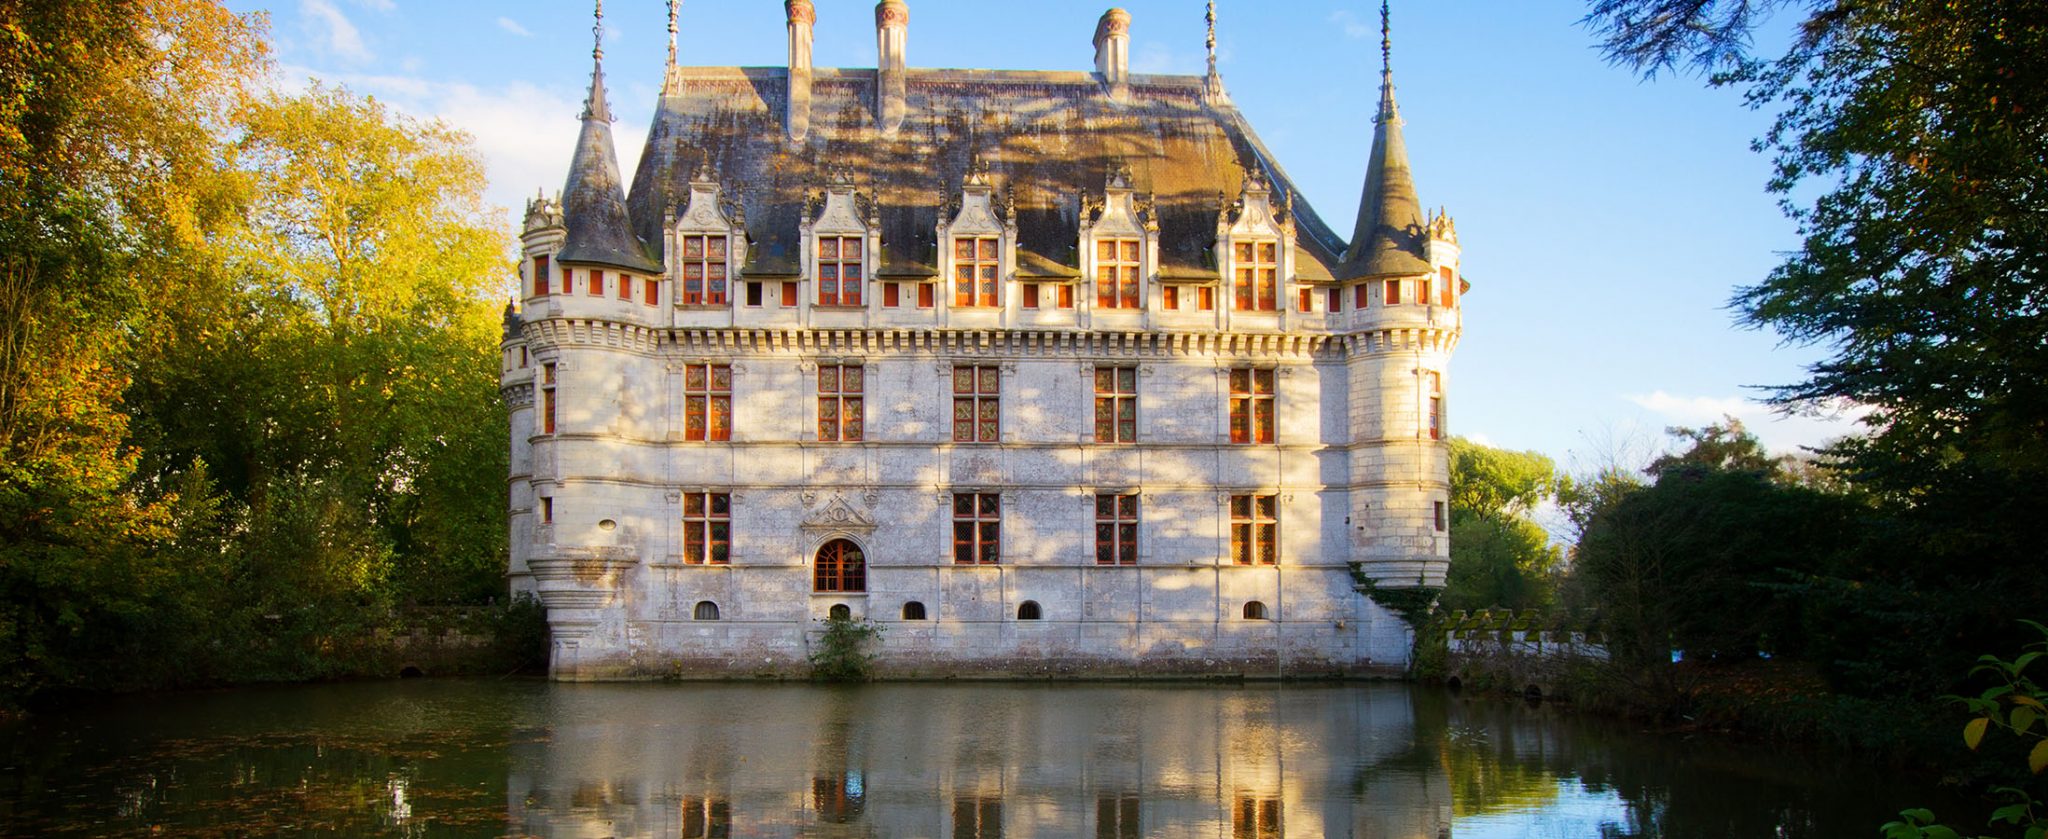 On of the enchanting castles in Loire Valley - FRANCE OFF THE BEATEN PATH™ tours